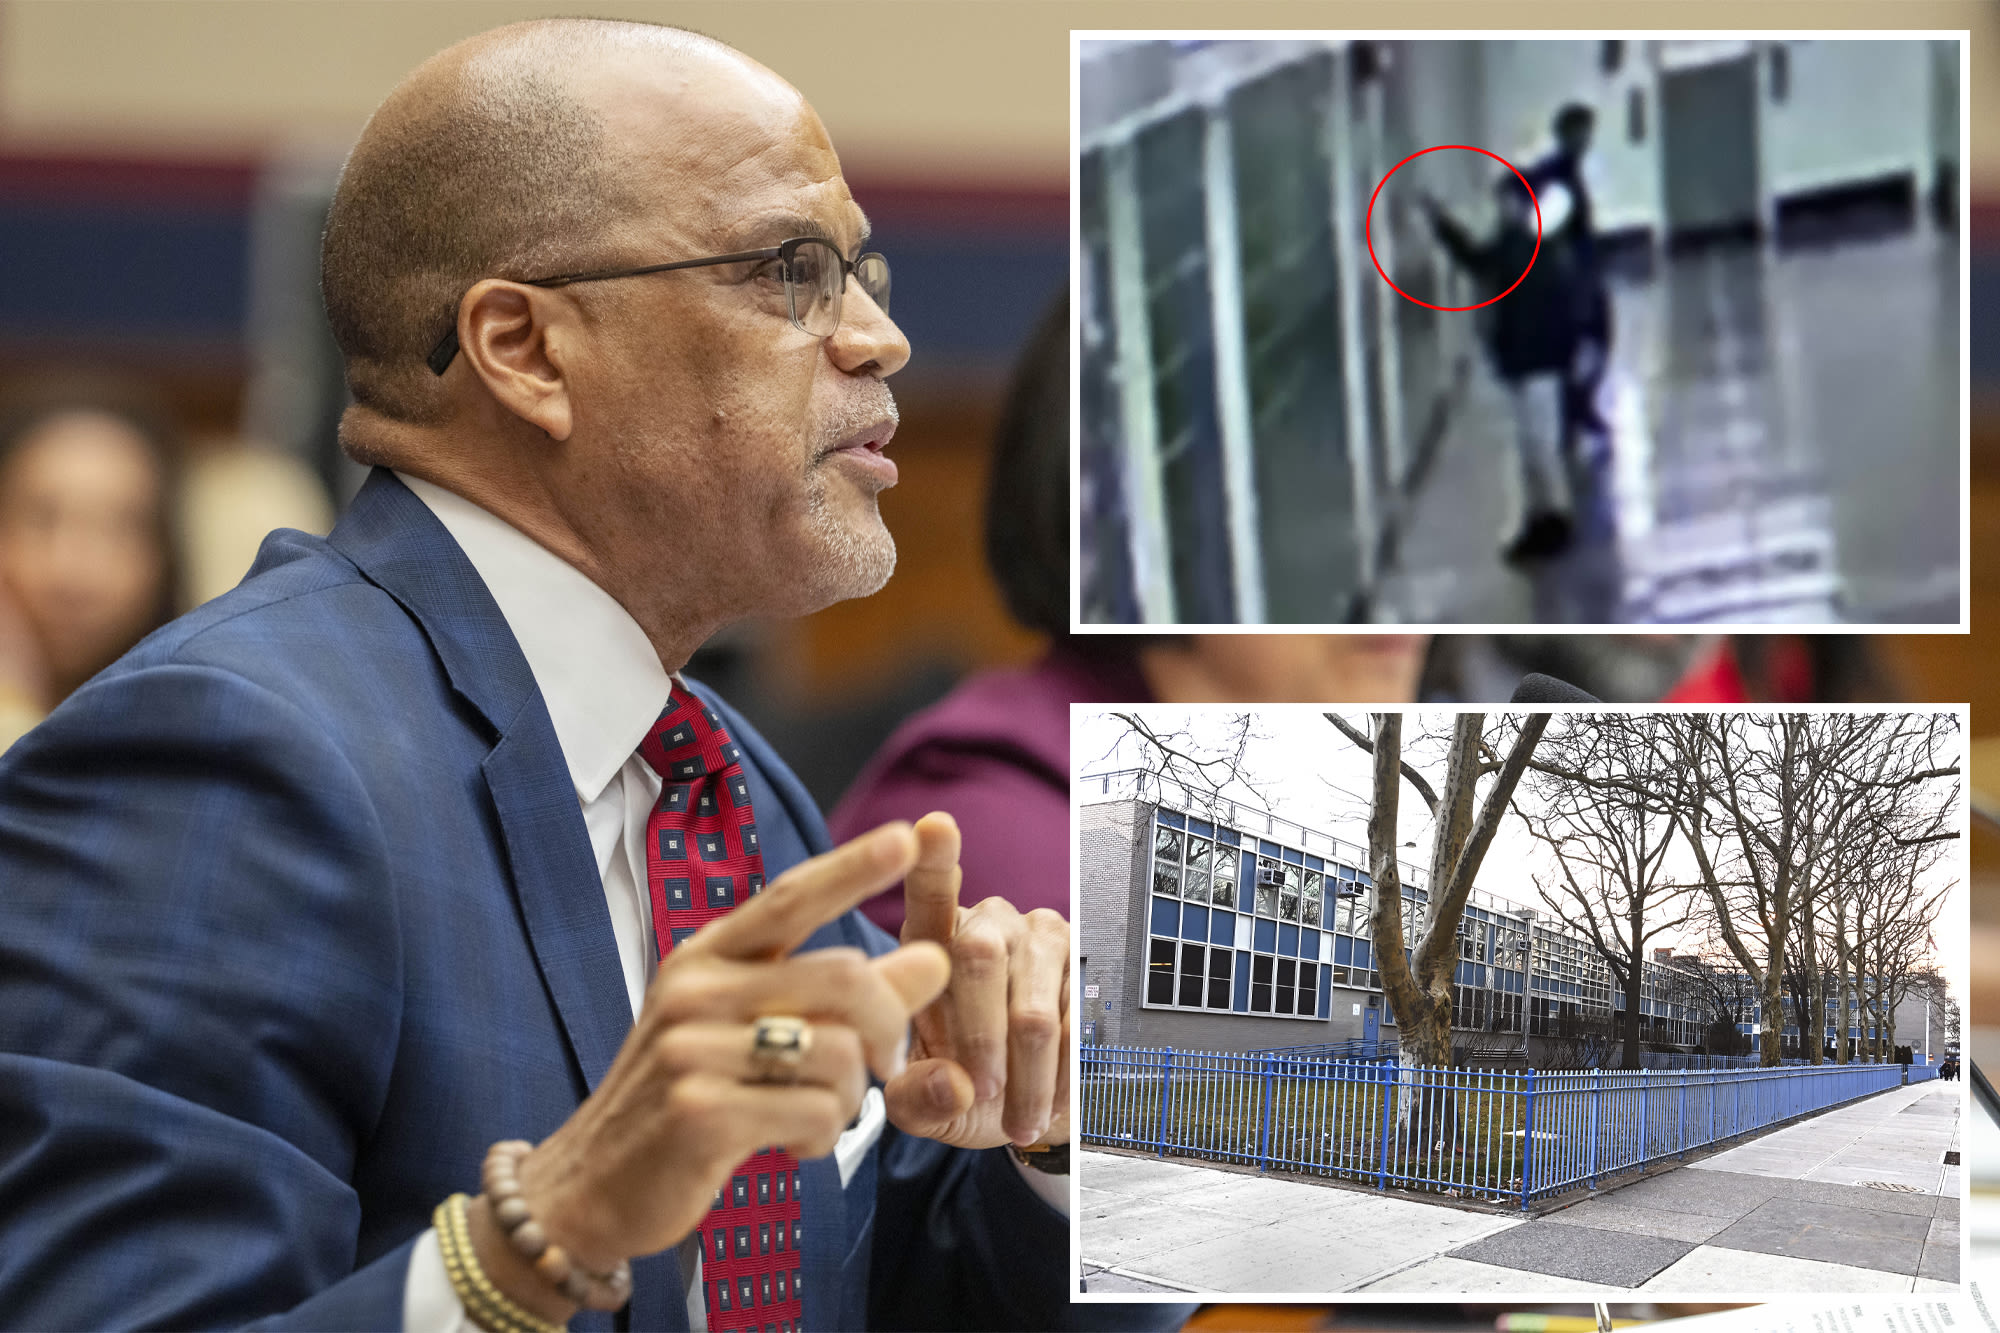 DOE never investigated ‘Kill the Jews’ chants at Brooklyn HS, despite Banks claims to the contrary: lawyer